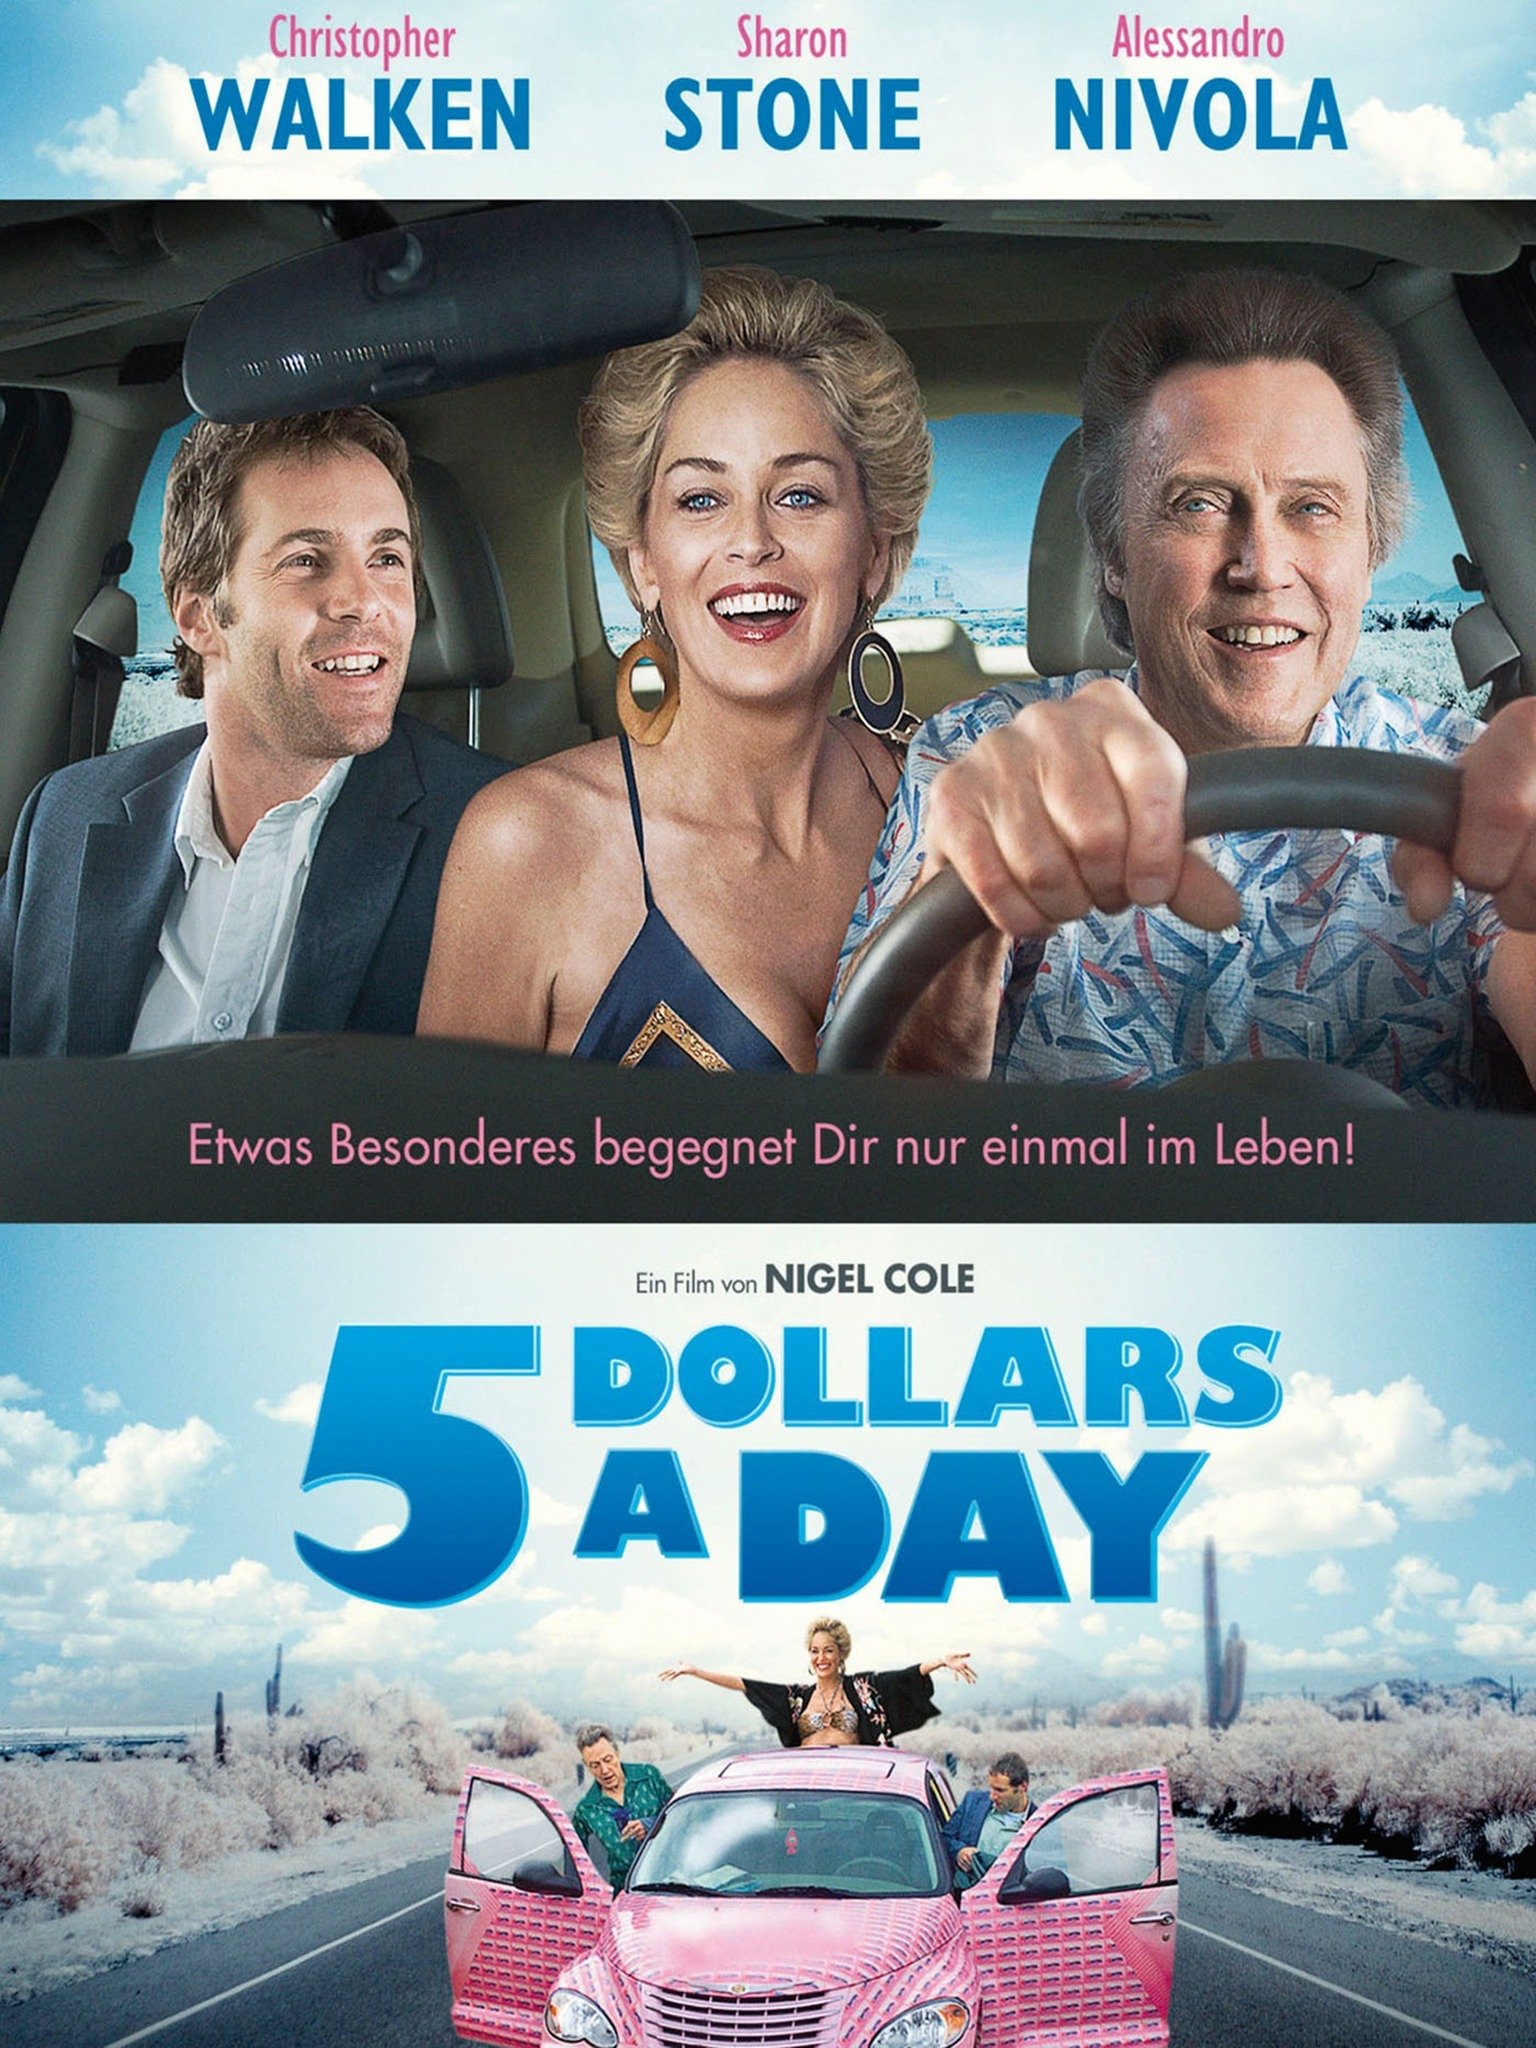 $5 a day movie review